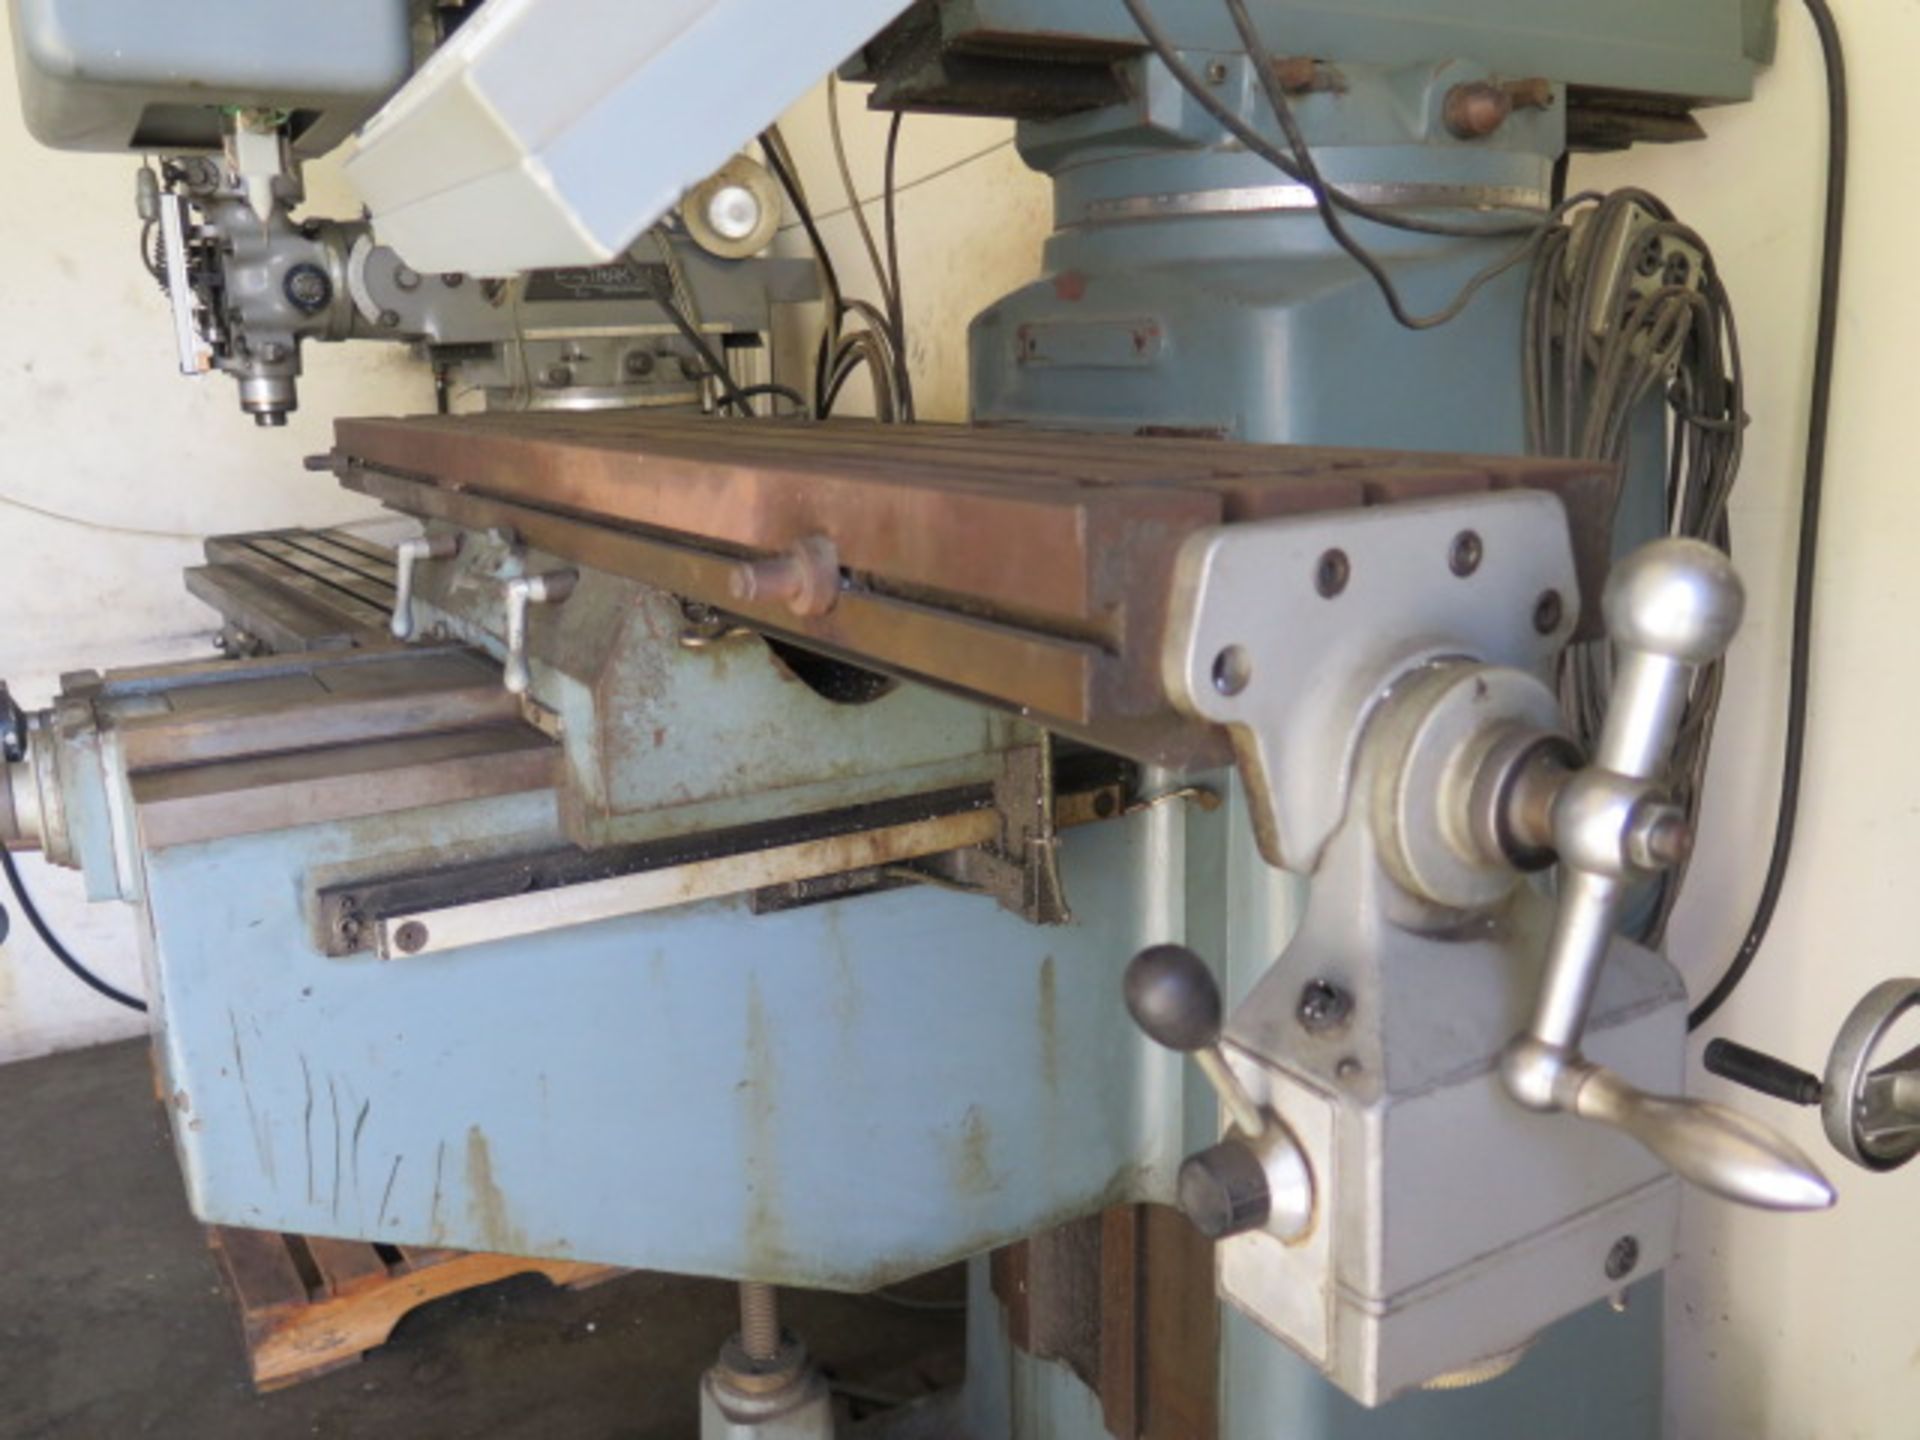 Telesis Pinstamp TMP3100 Pin Stamping Machine (On Vertical Mill Base) w/Telesis Controls, SOLD AS IS - Image 7 of 9